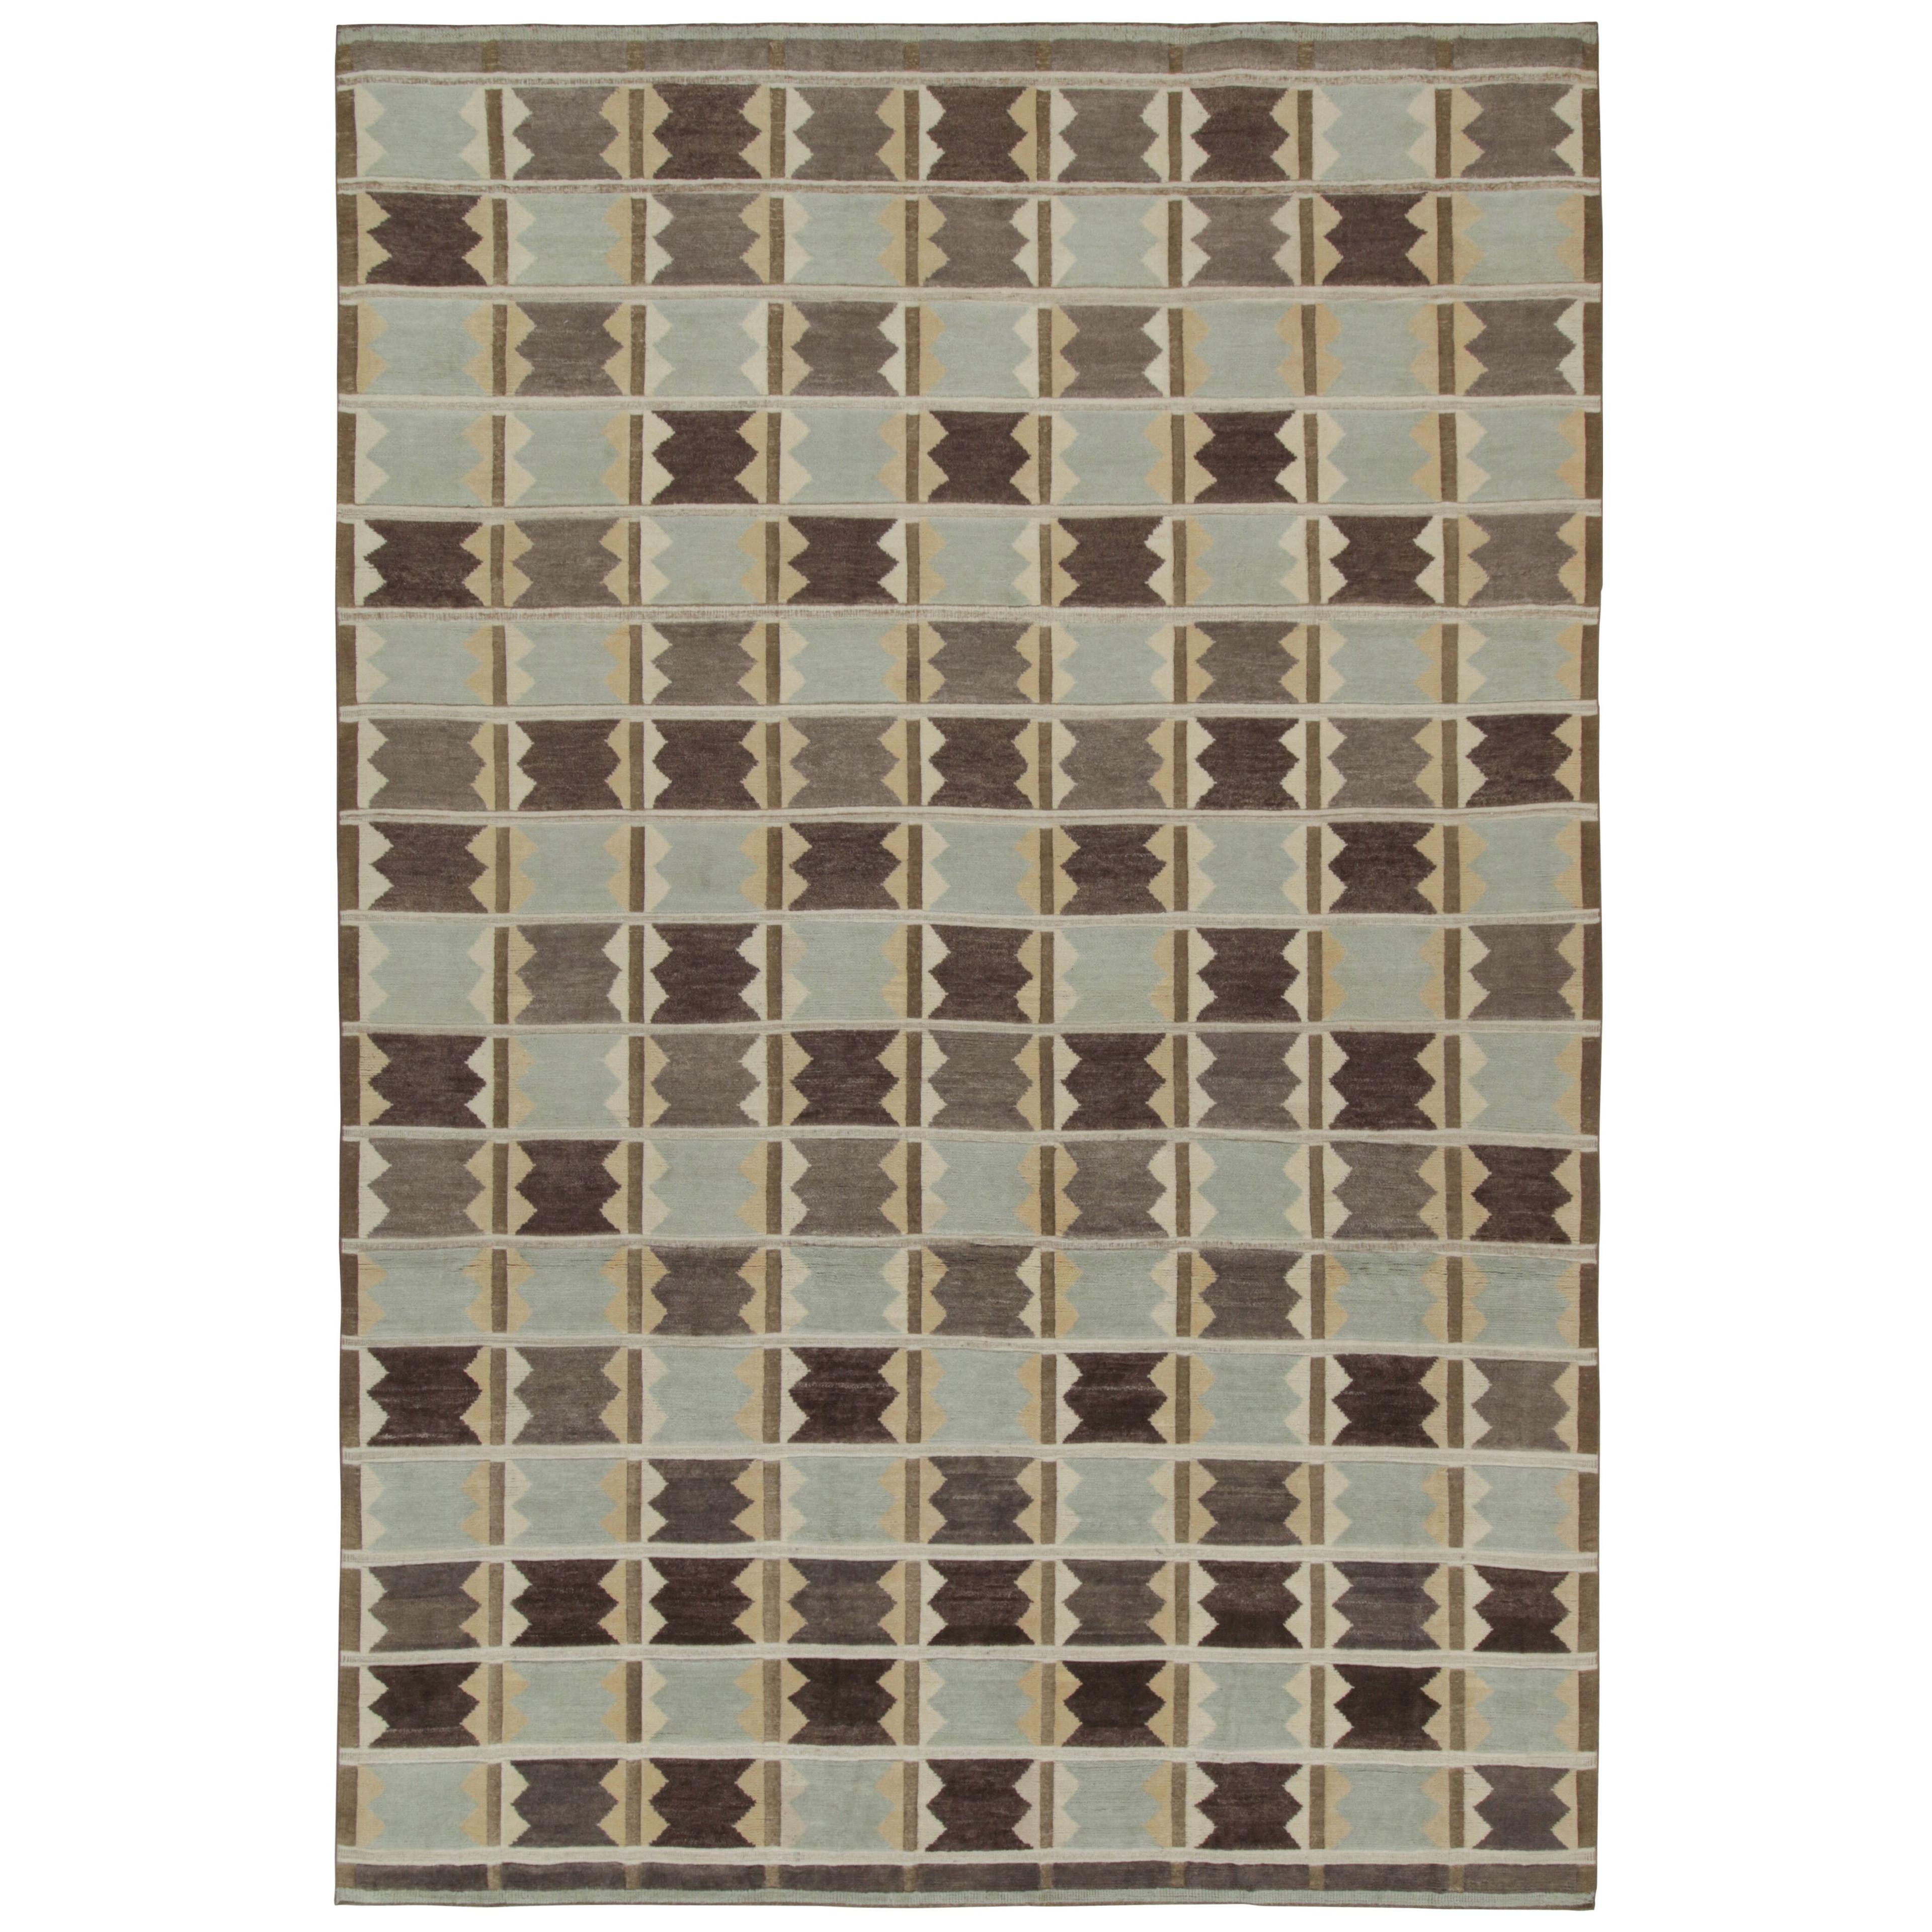 Rug & Kilim’s Scandinavian Style Rug In Taupe And Blue Geometric Patterns